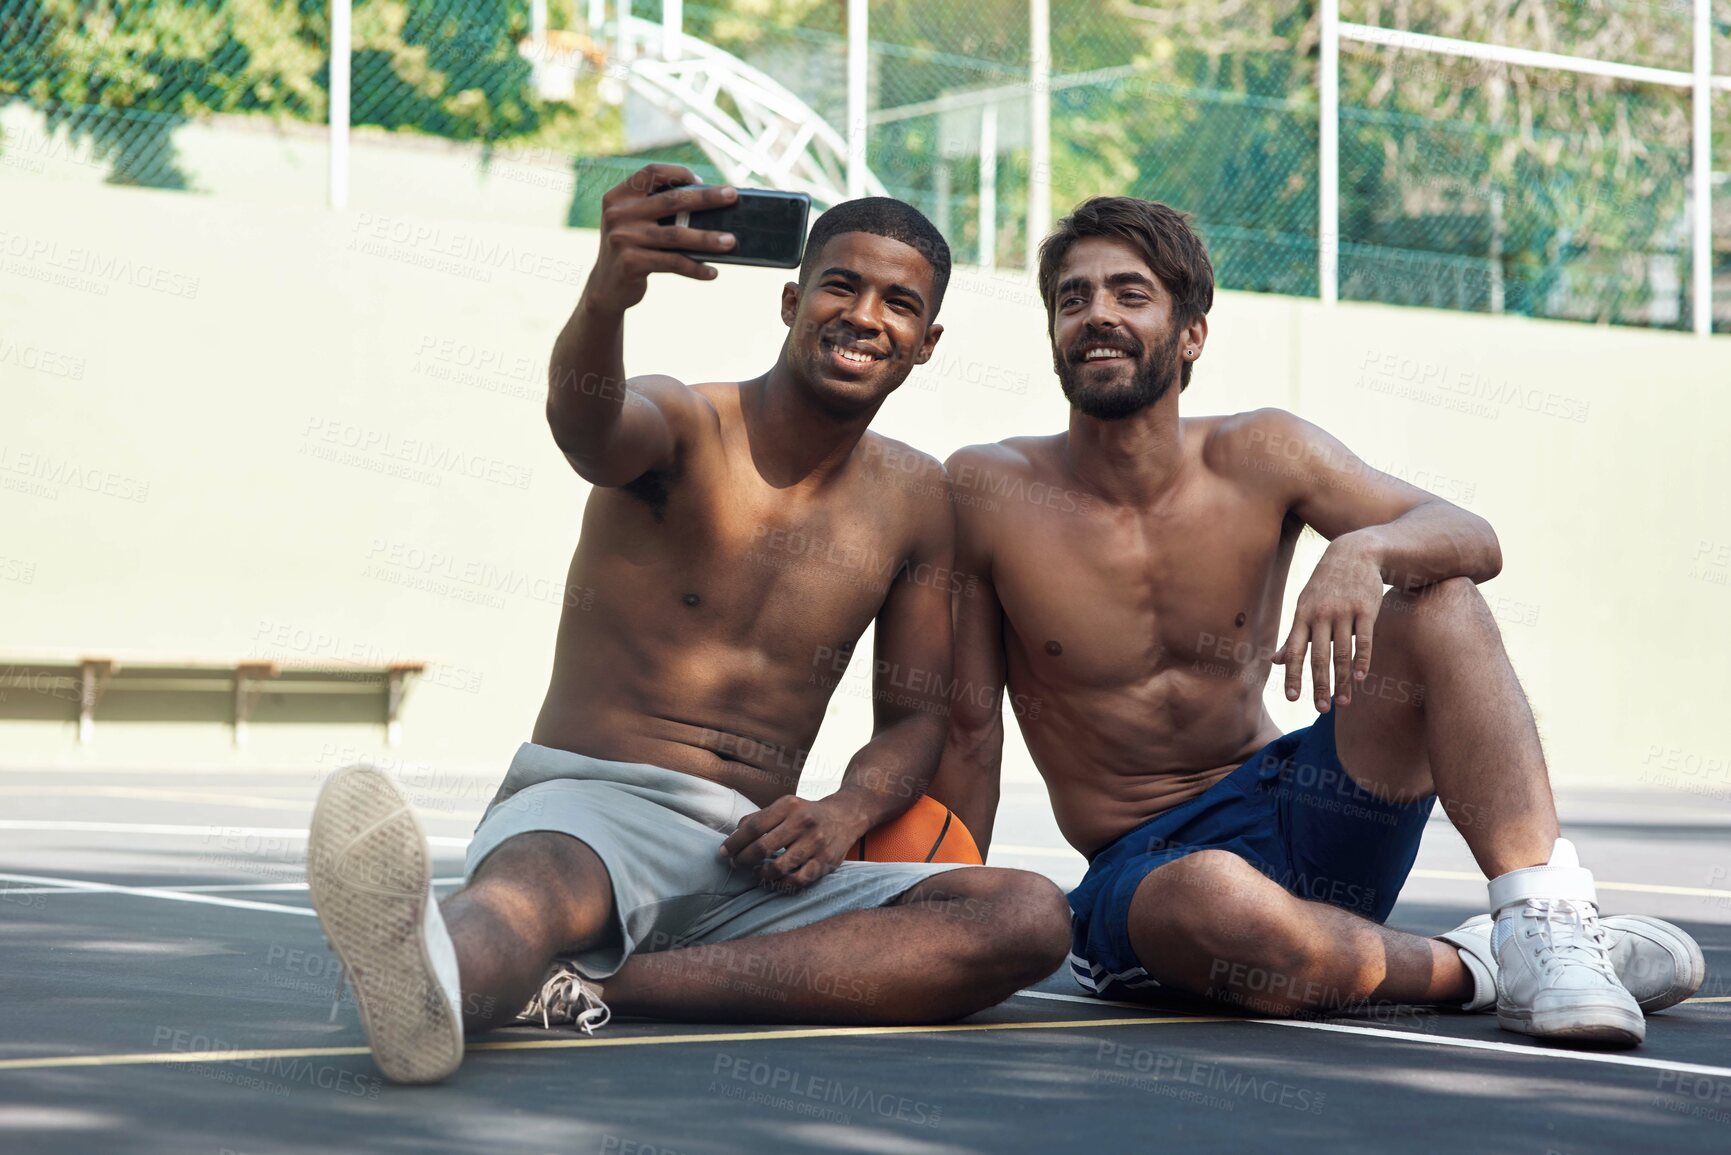 Buy stock photo Shot of two sporty young men taking selfies on a basketball court